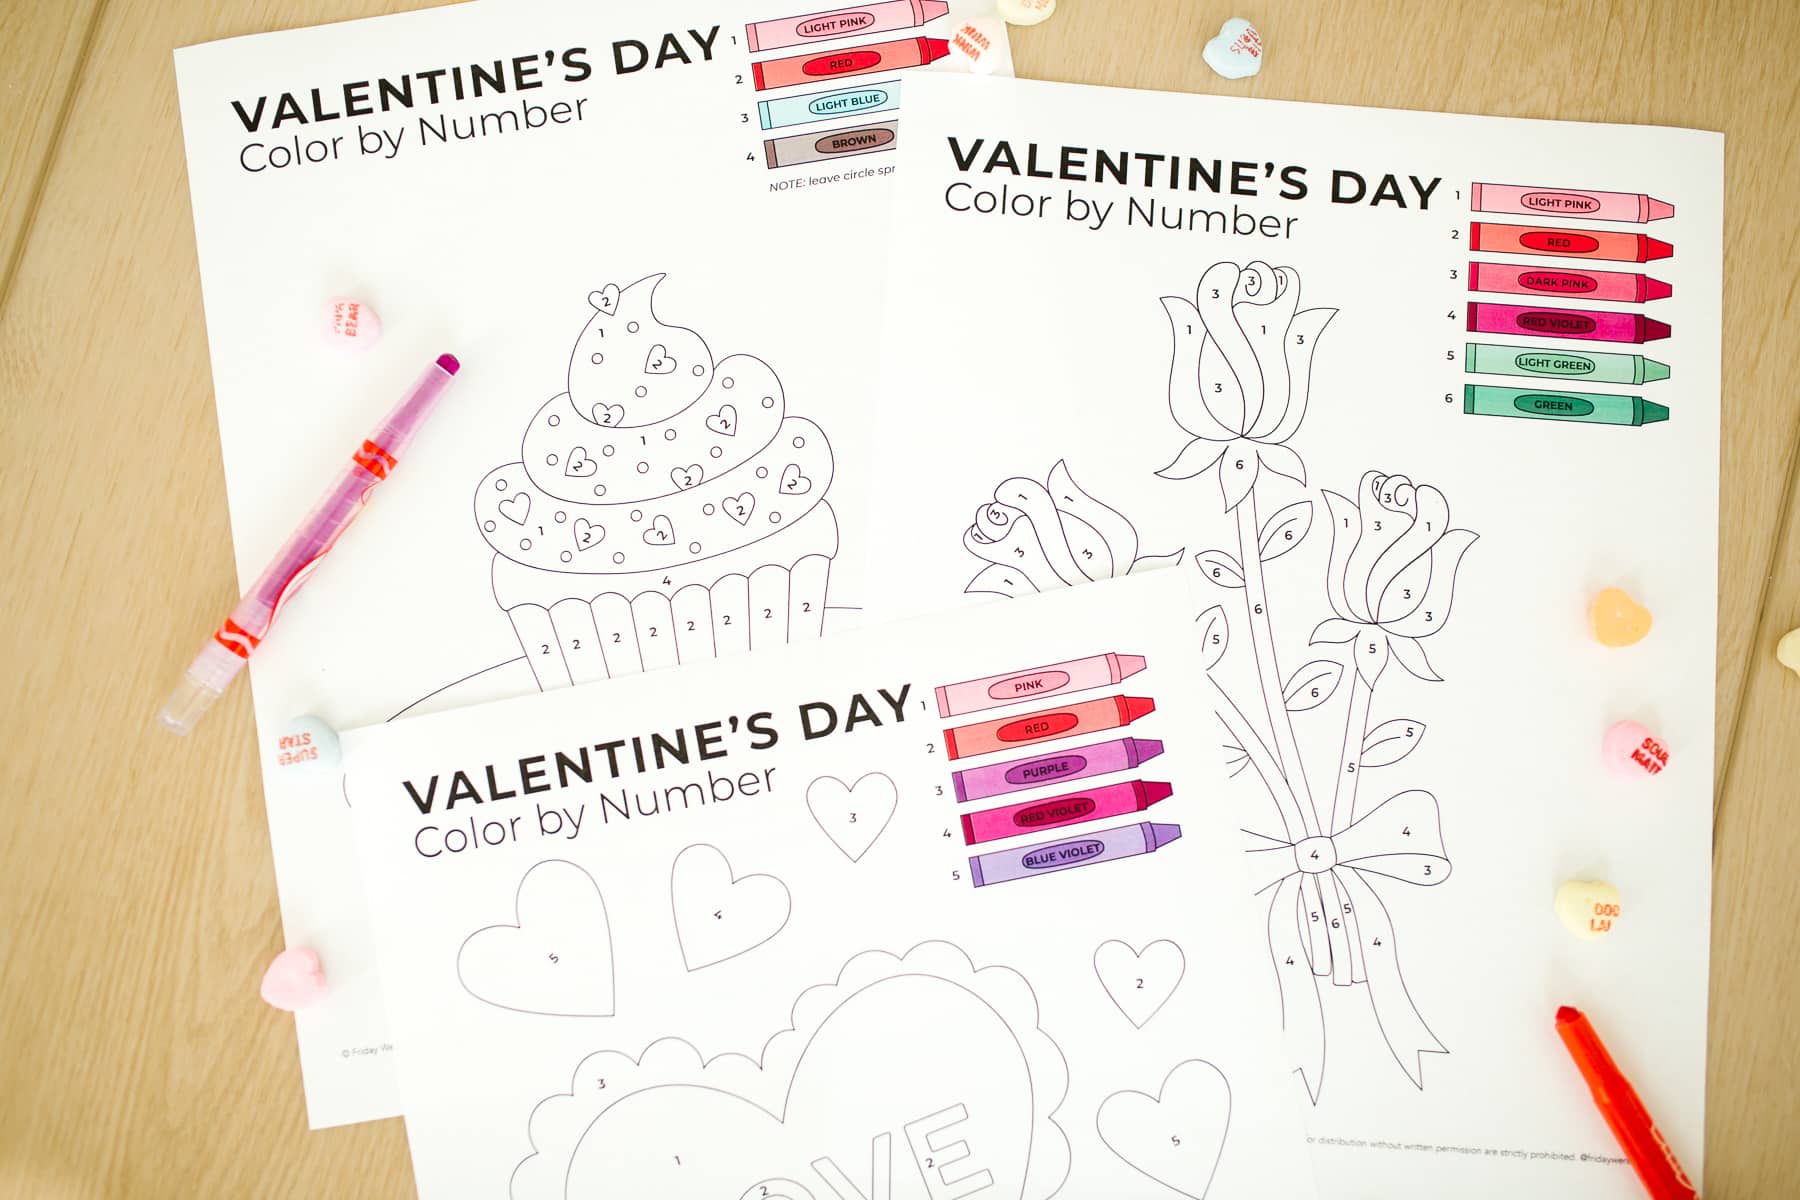 Color by Number Valentines printed out with crayons. 